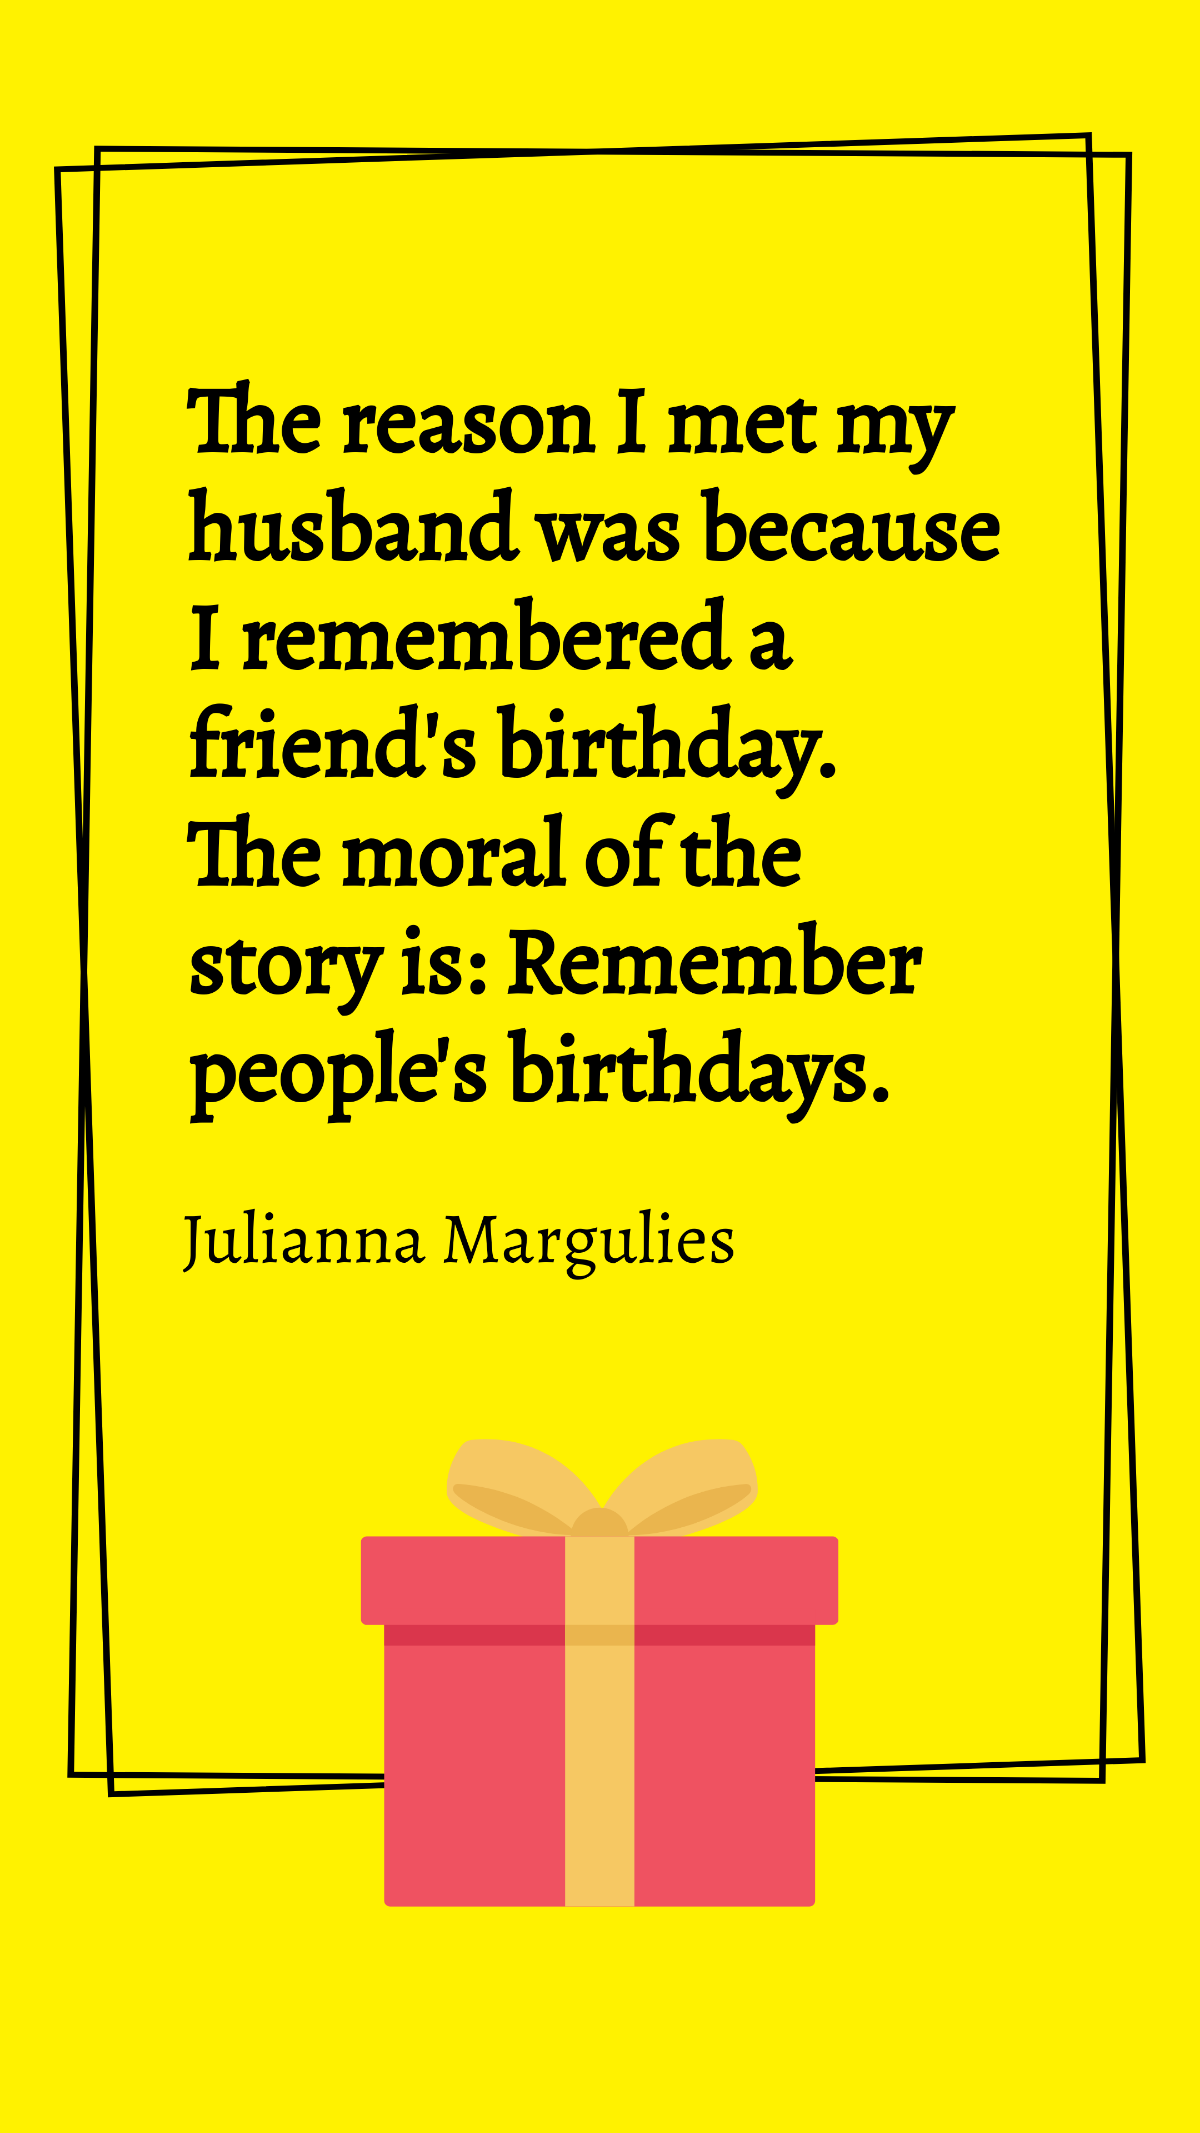 Julianna Margulies - The reason I met my husband was because I remembered a friend's birthday. The moral of the story is: Remember people's birthdays.